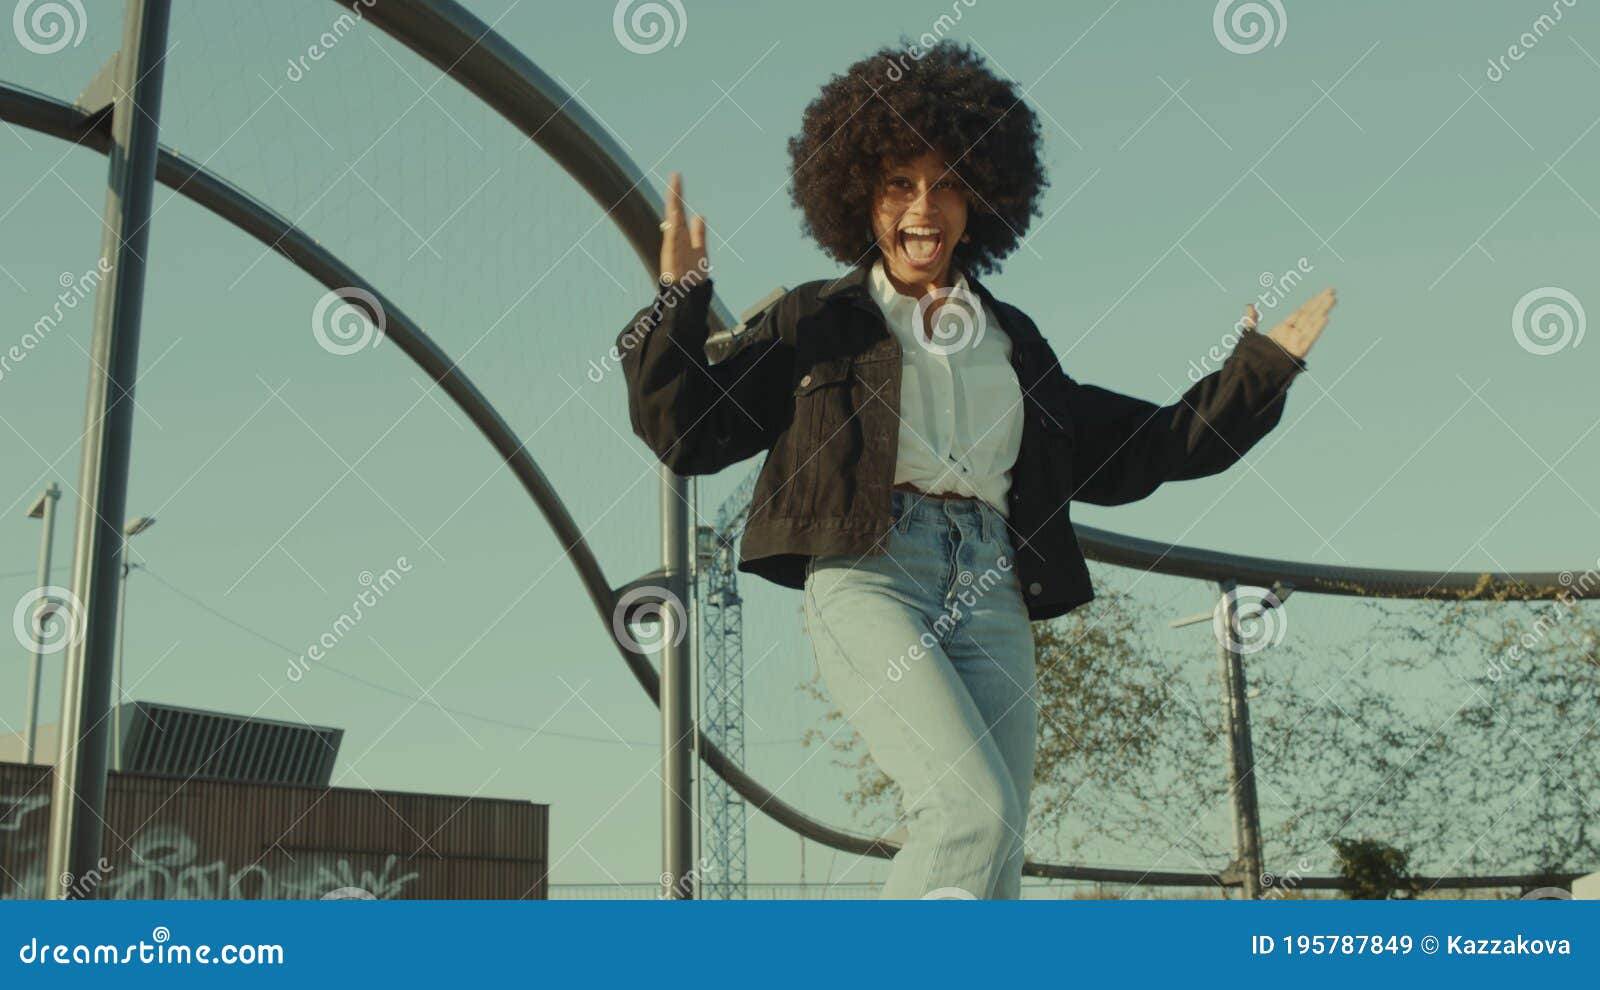 Black Woman with 70s Disco Style Look Dancing Funk Disco Dance Outdoors  Stock Image - Image of happy, motion: 195787849